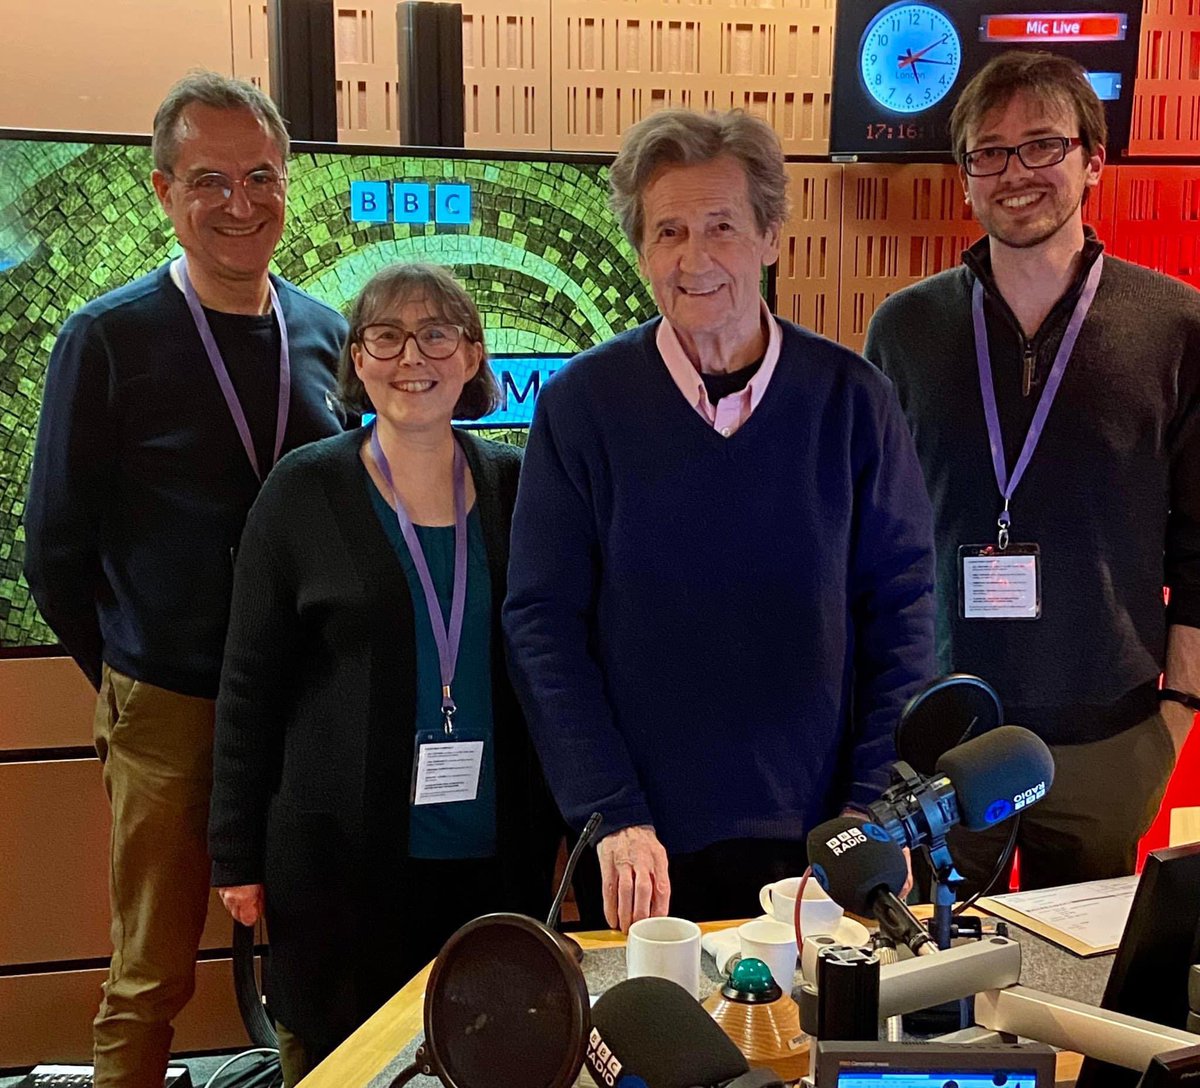 Senior WIE Fellow @100Days1815 (Kate Astbury) is on R4 now (repeated at 6pm this evening) talking to Melvyn Bragg about Napoleon’s return to power in 1815.